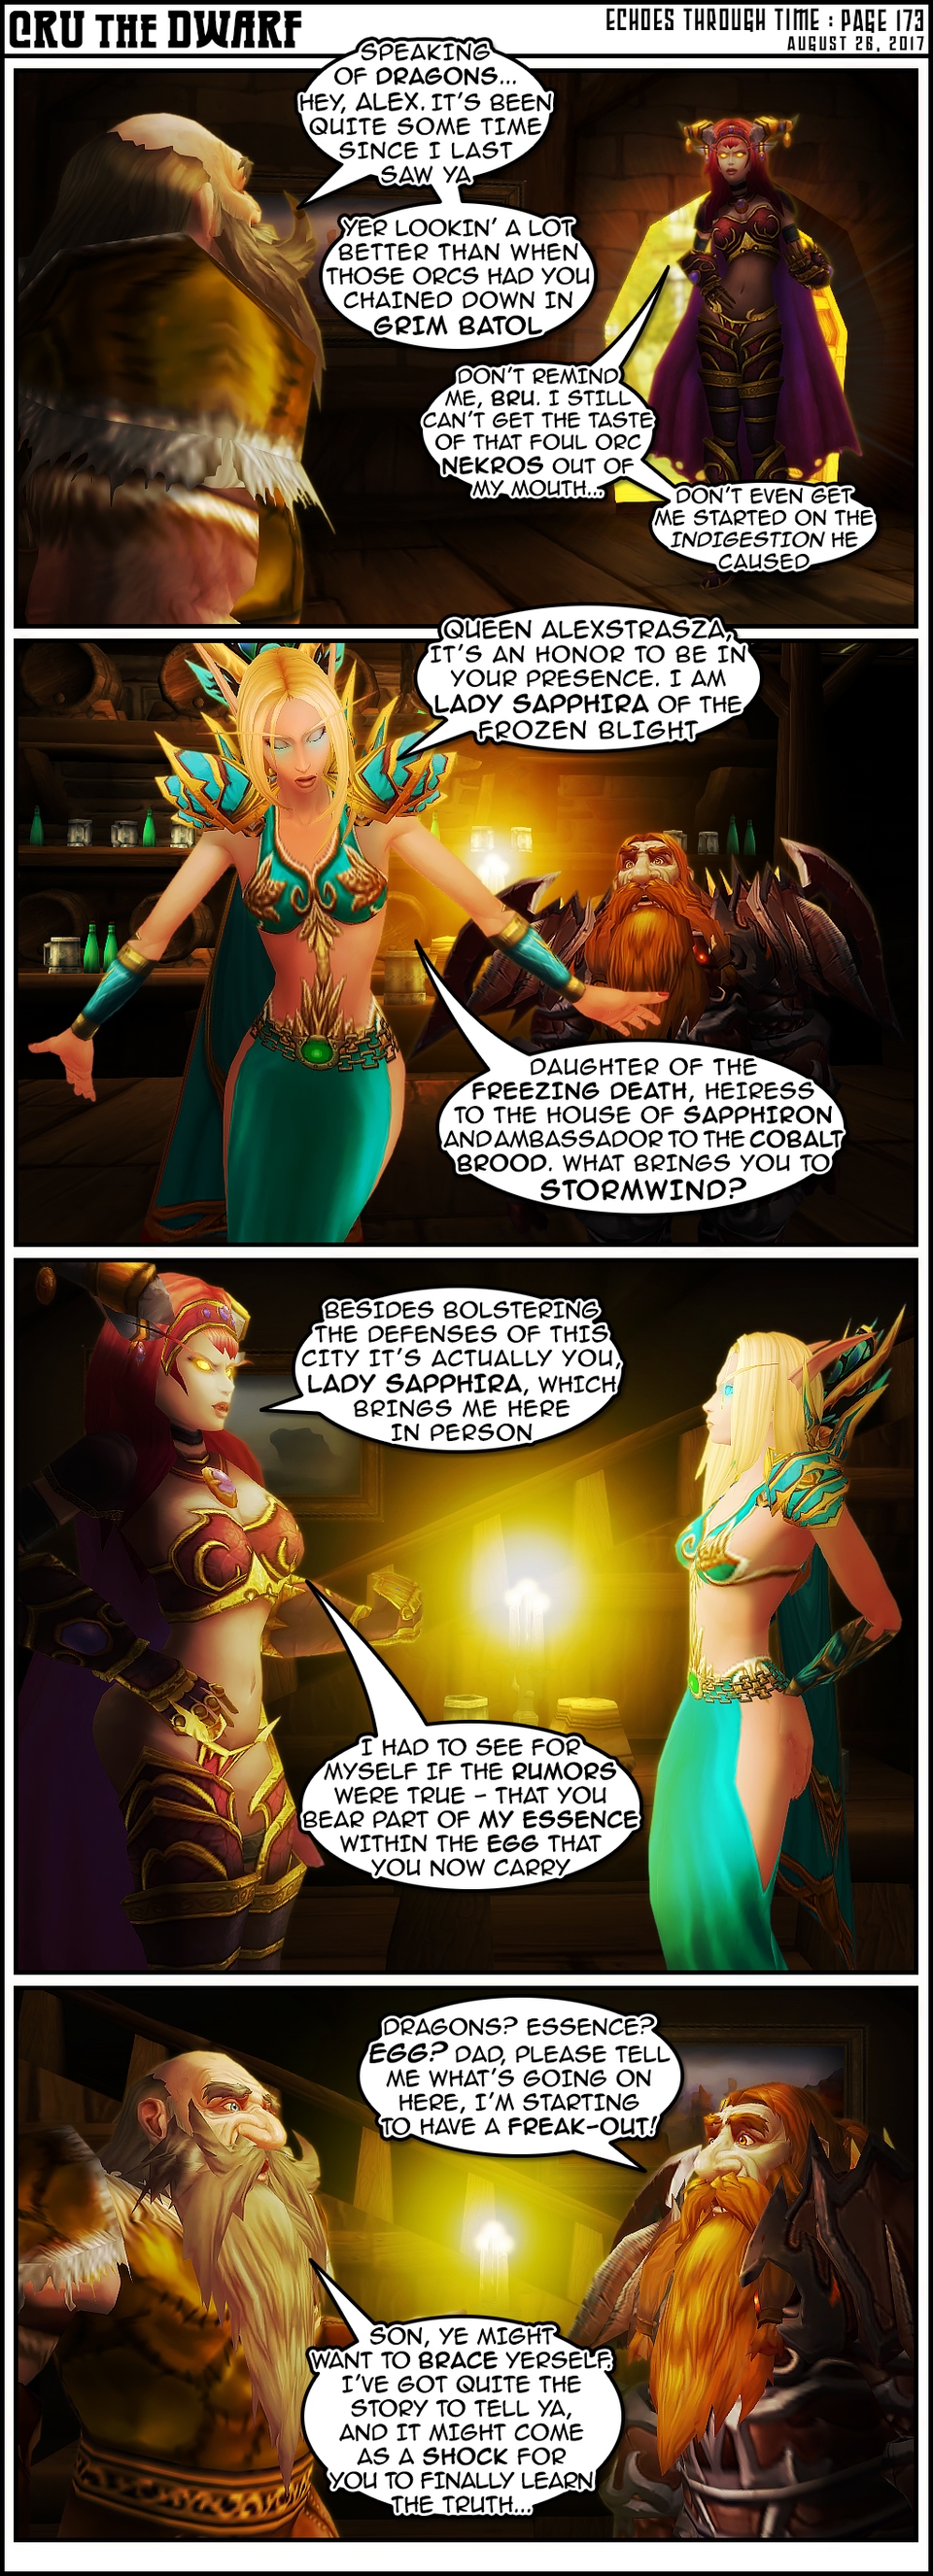 Echoes Through Time - Pg 173 “Learn The Truth”